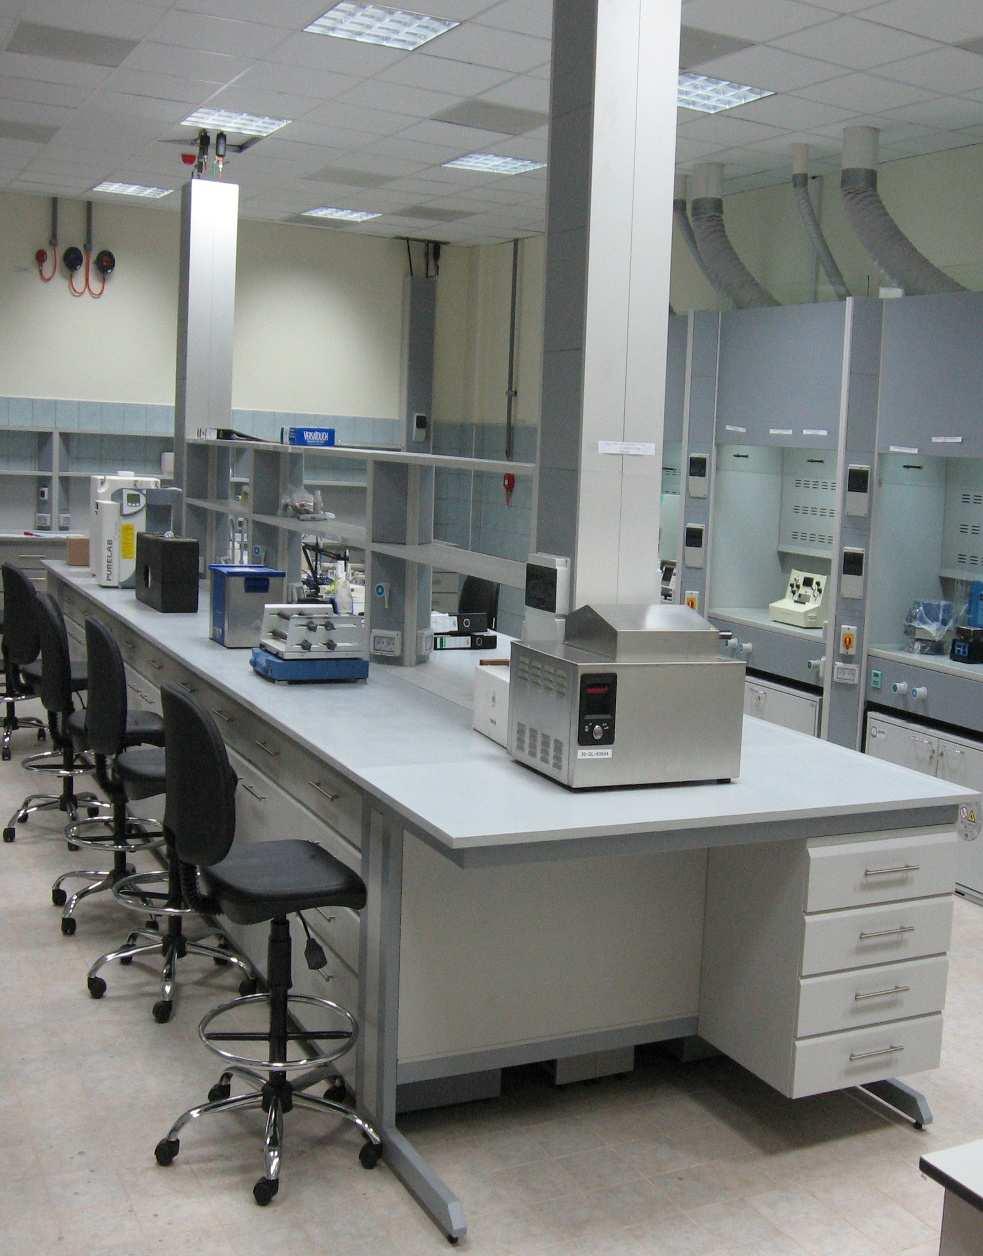 - Electricity Electricity Gases are heavily used in most laboratories and